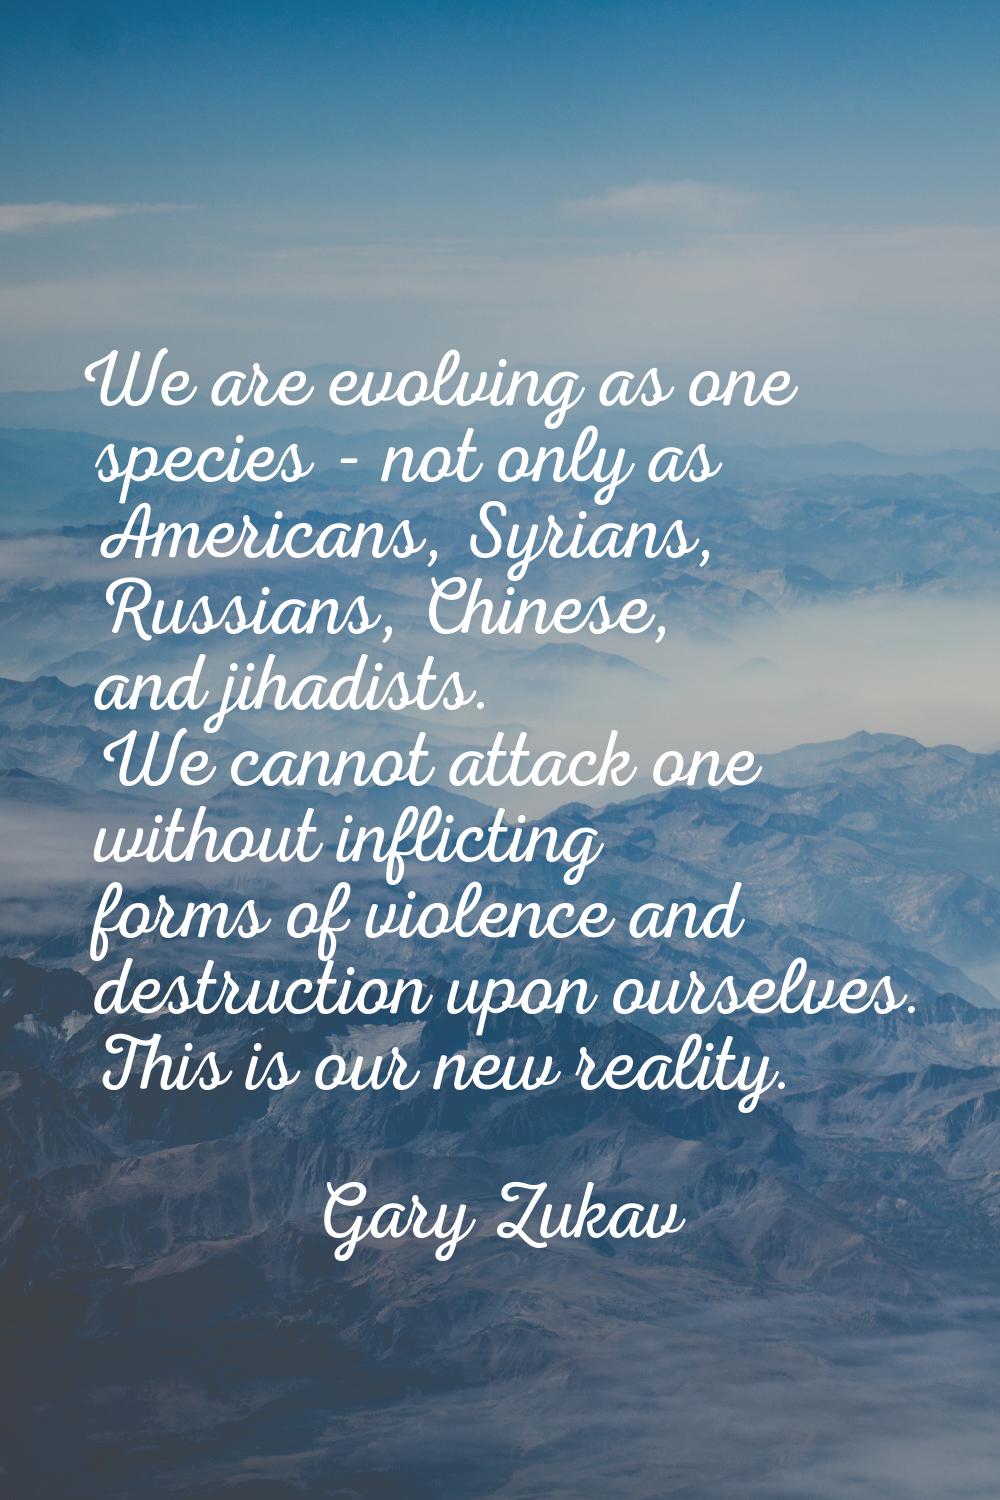 We are evolving as one species - not only as Americans, Syrians, Russians, Chinese, and jihadists. 